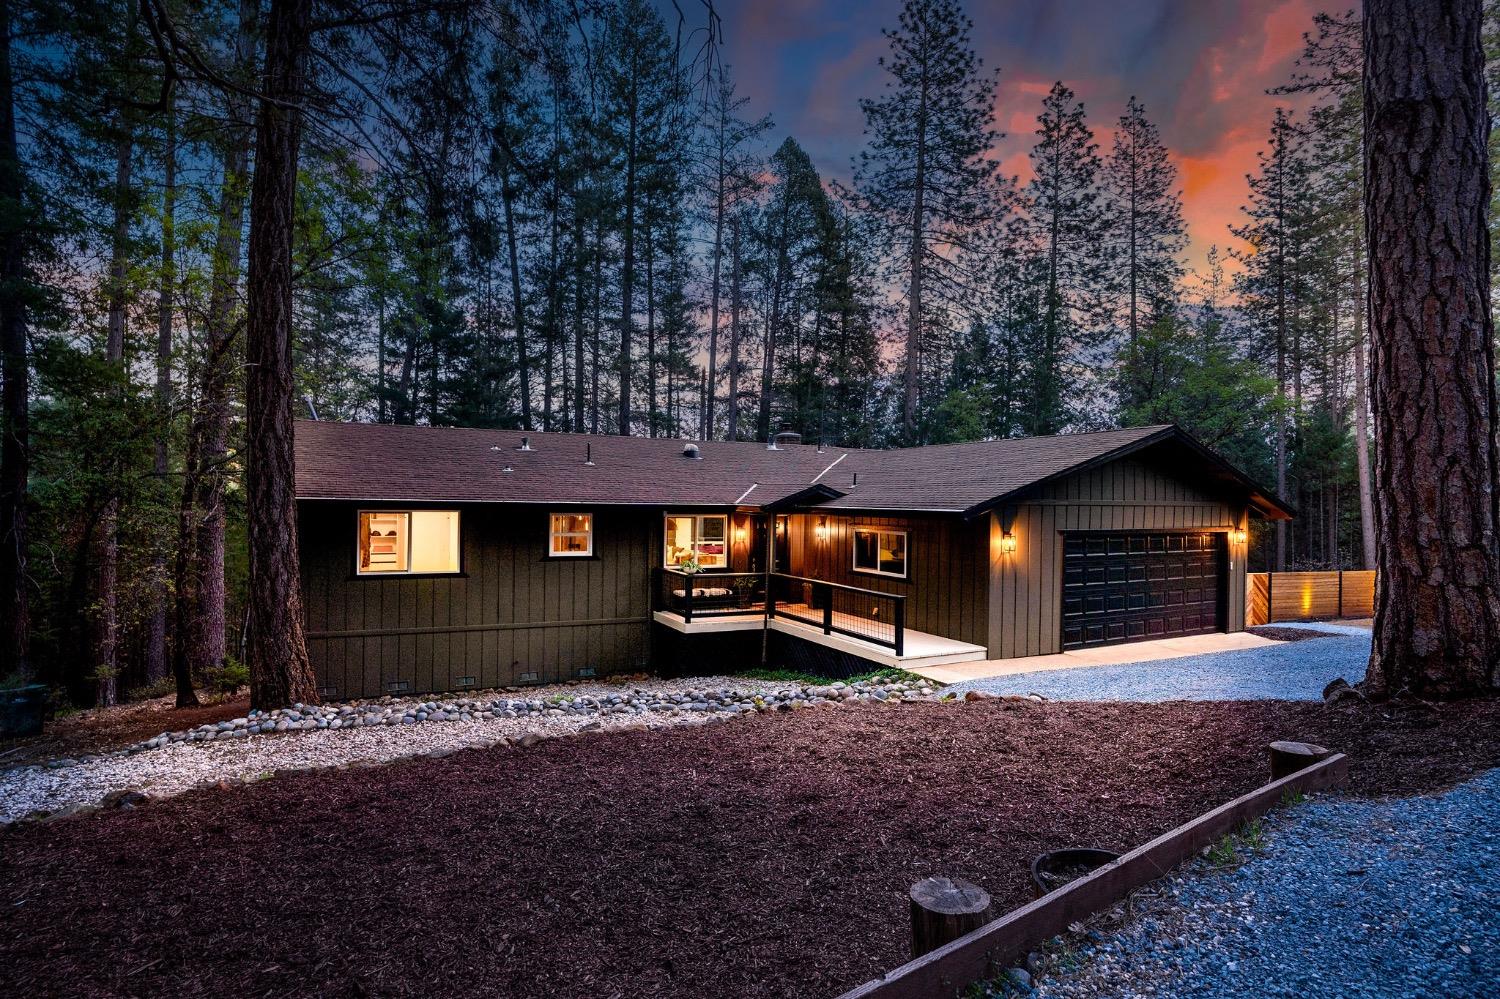 Photo of 13981 Linden Rd in Grass Valley, CA